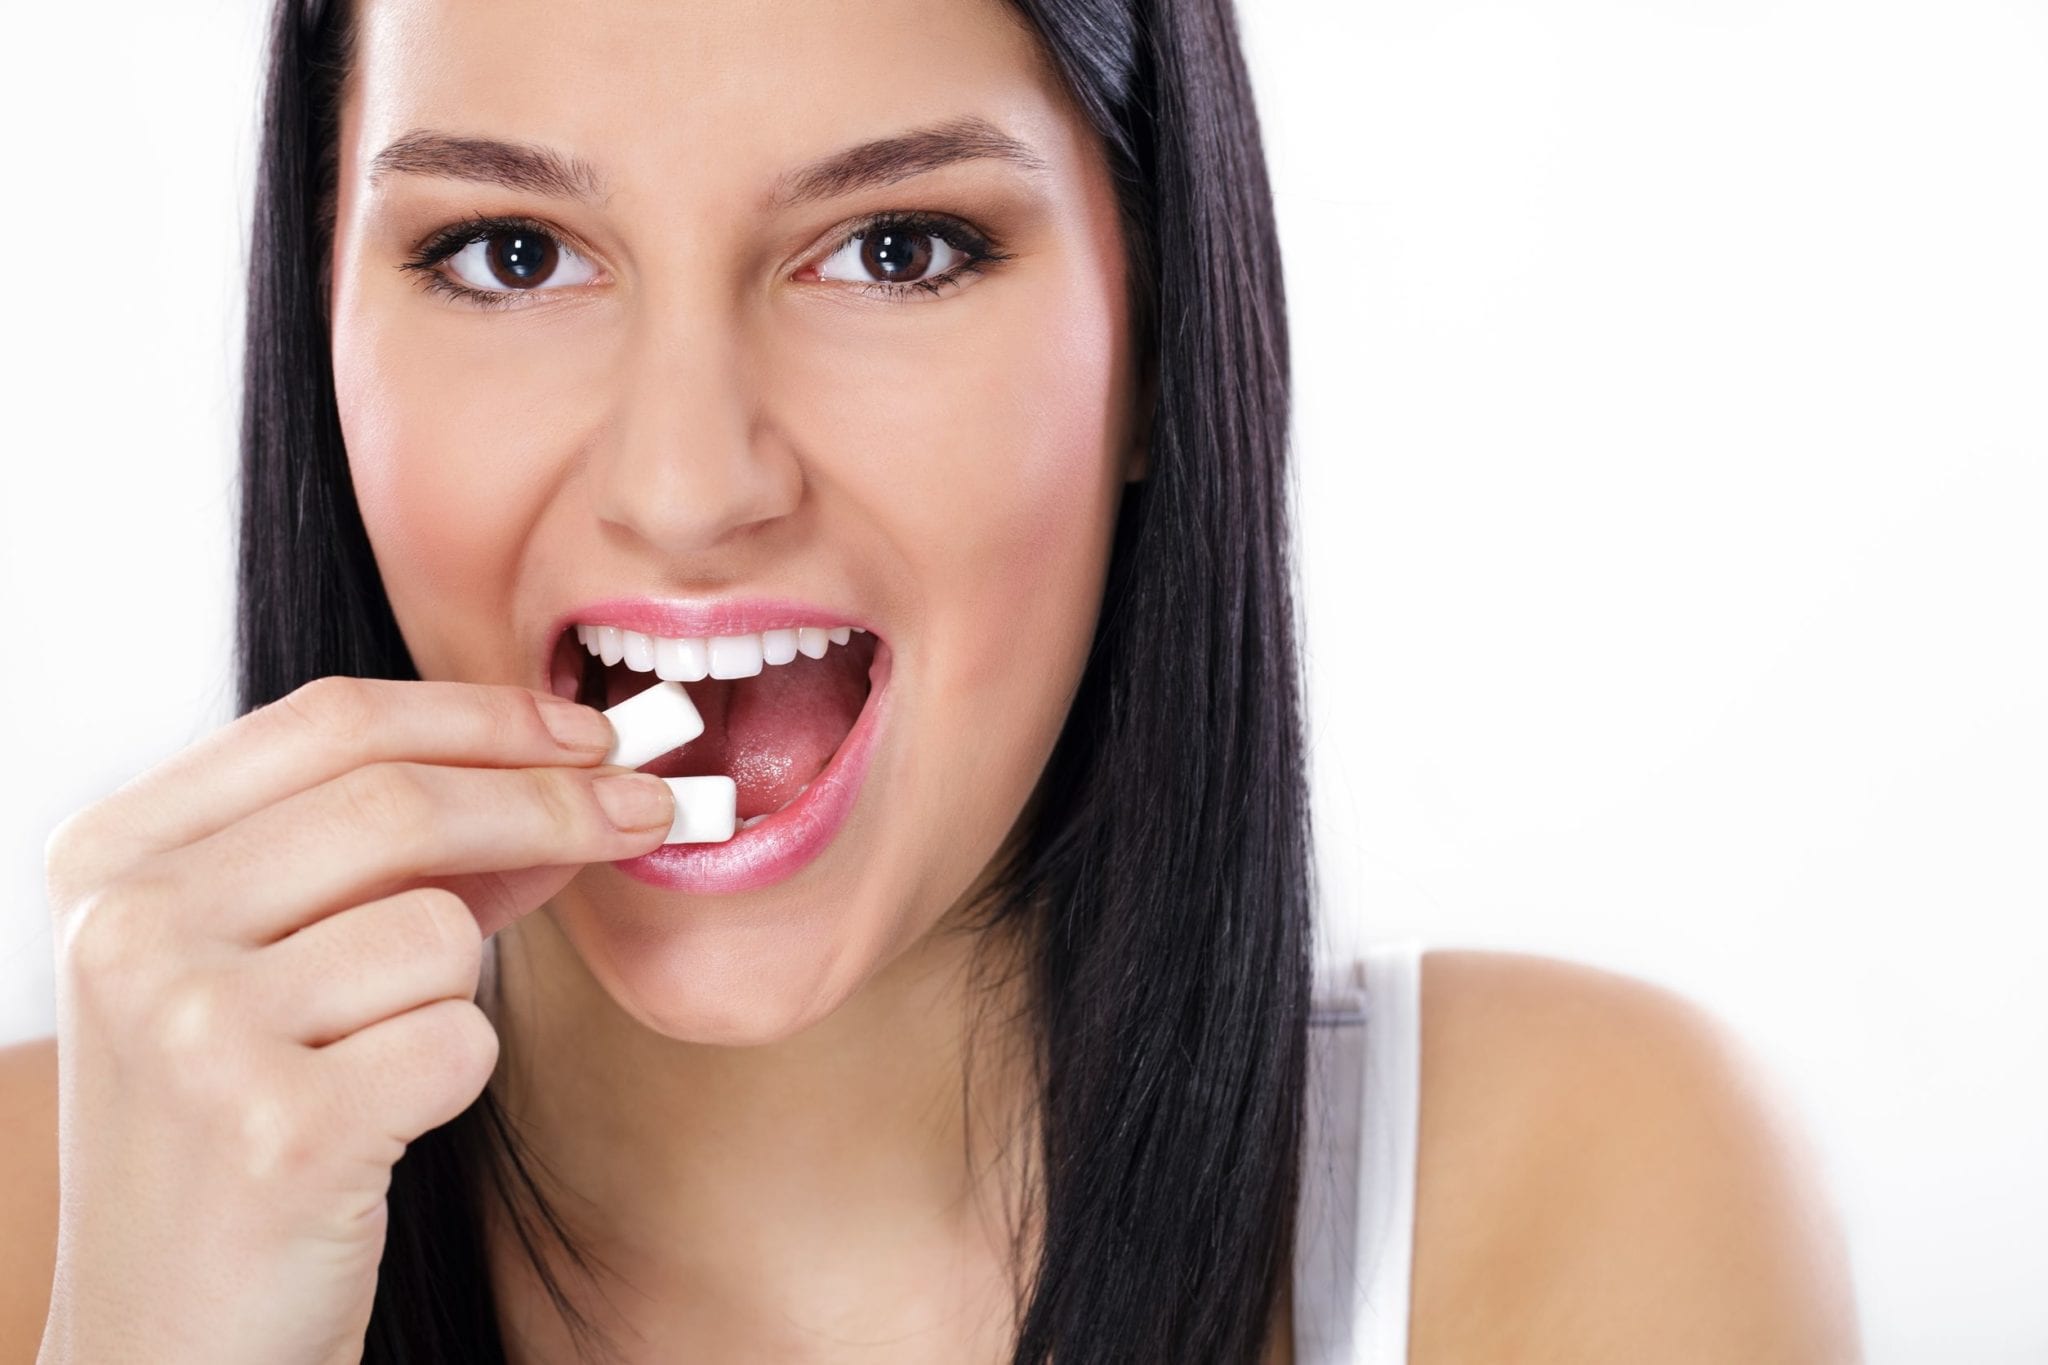 Can Chewing Gum Be Good for Your Teeth?